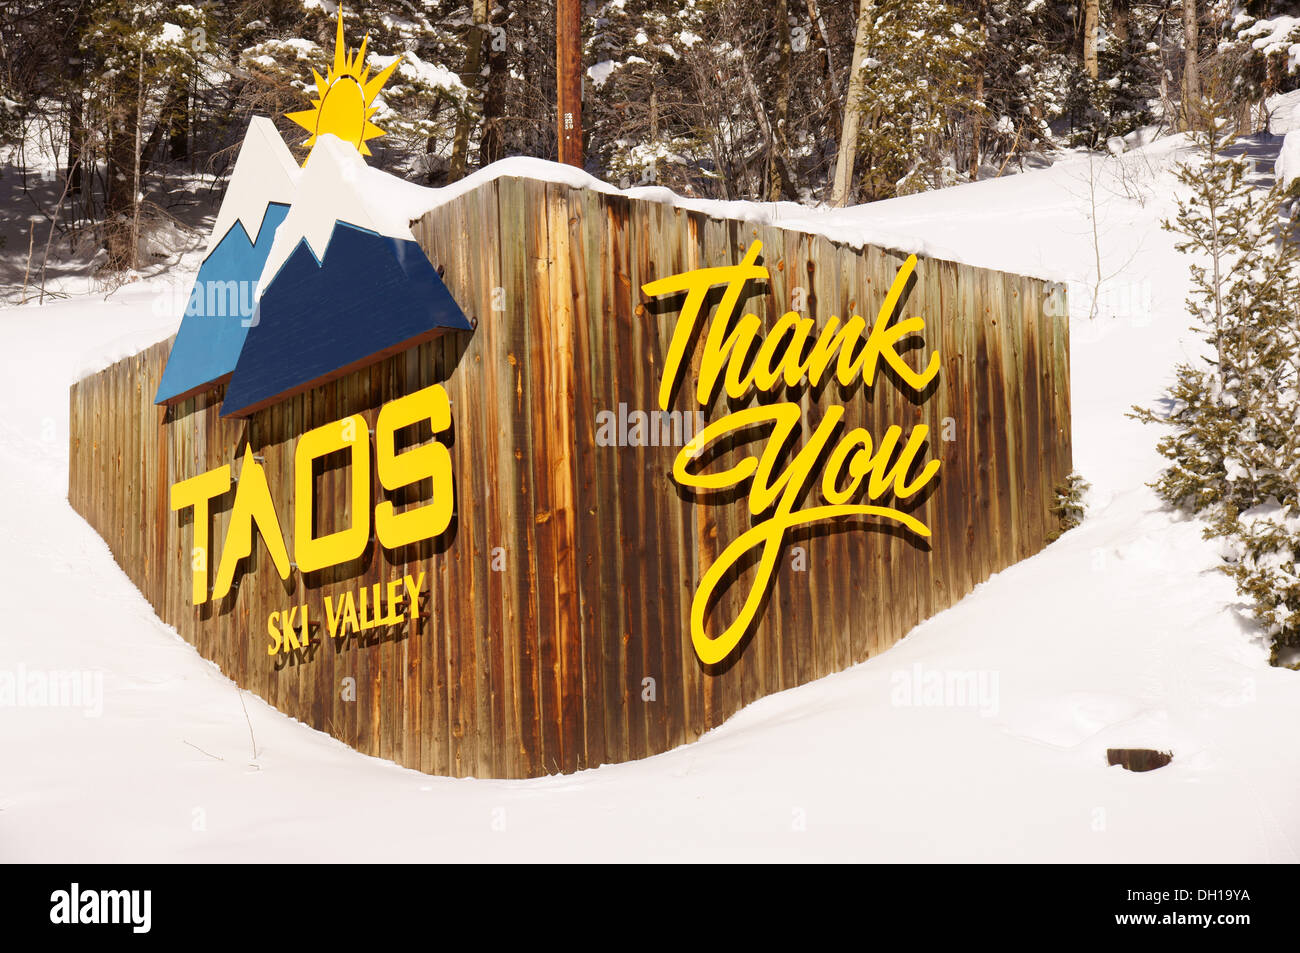 taos ski valley entrance sign thank you winter snow village alpine resort county new mexico nm united states Stock Photo